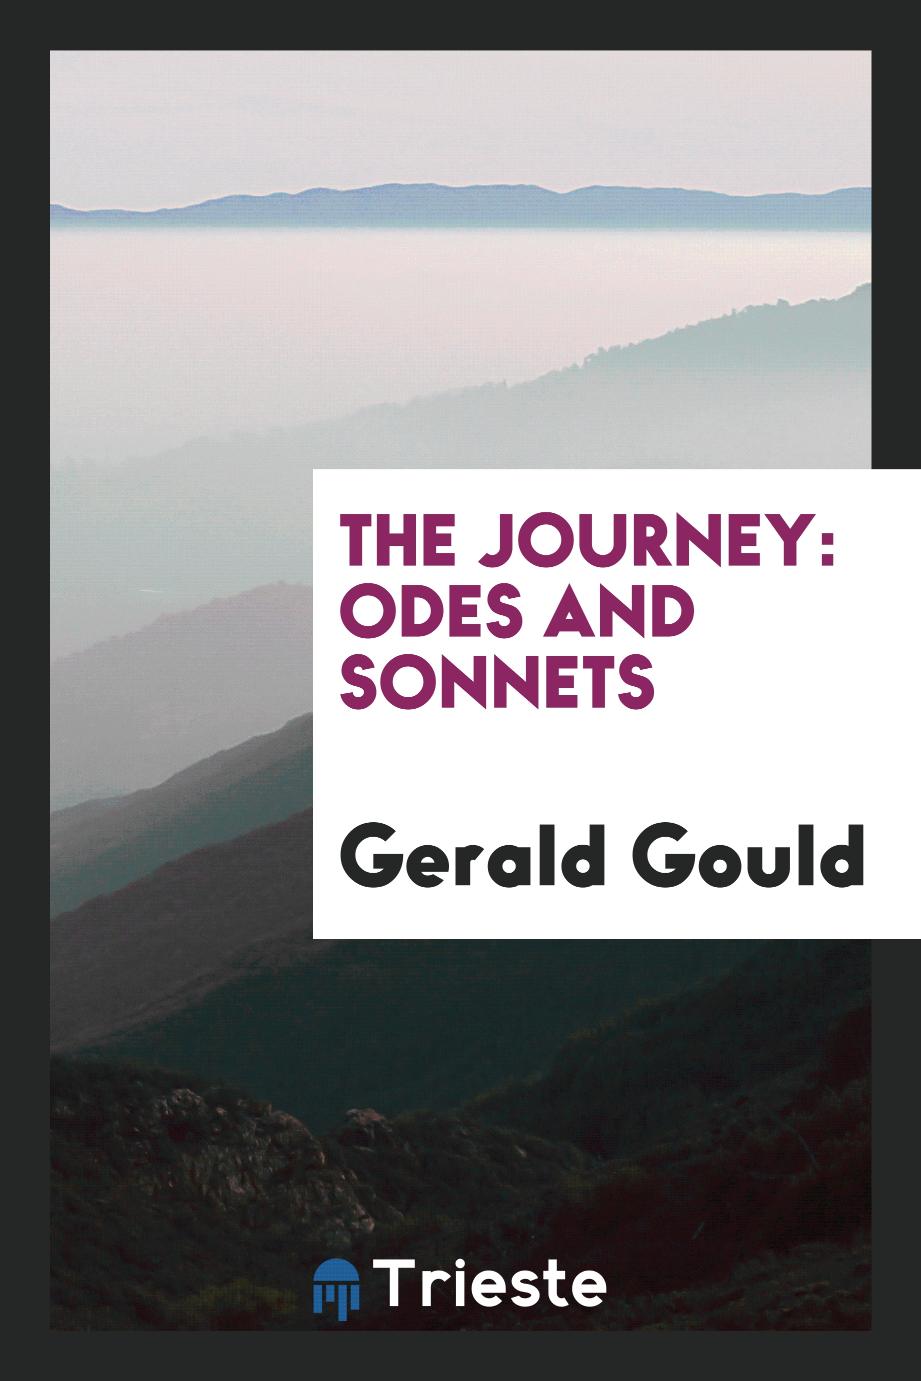 The Journey: Odes and Sonnets